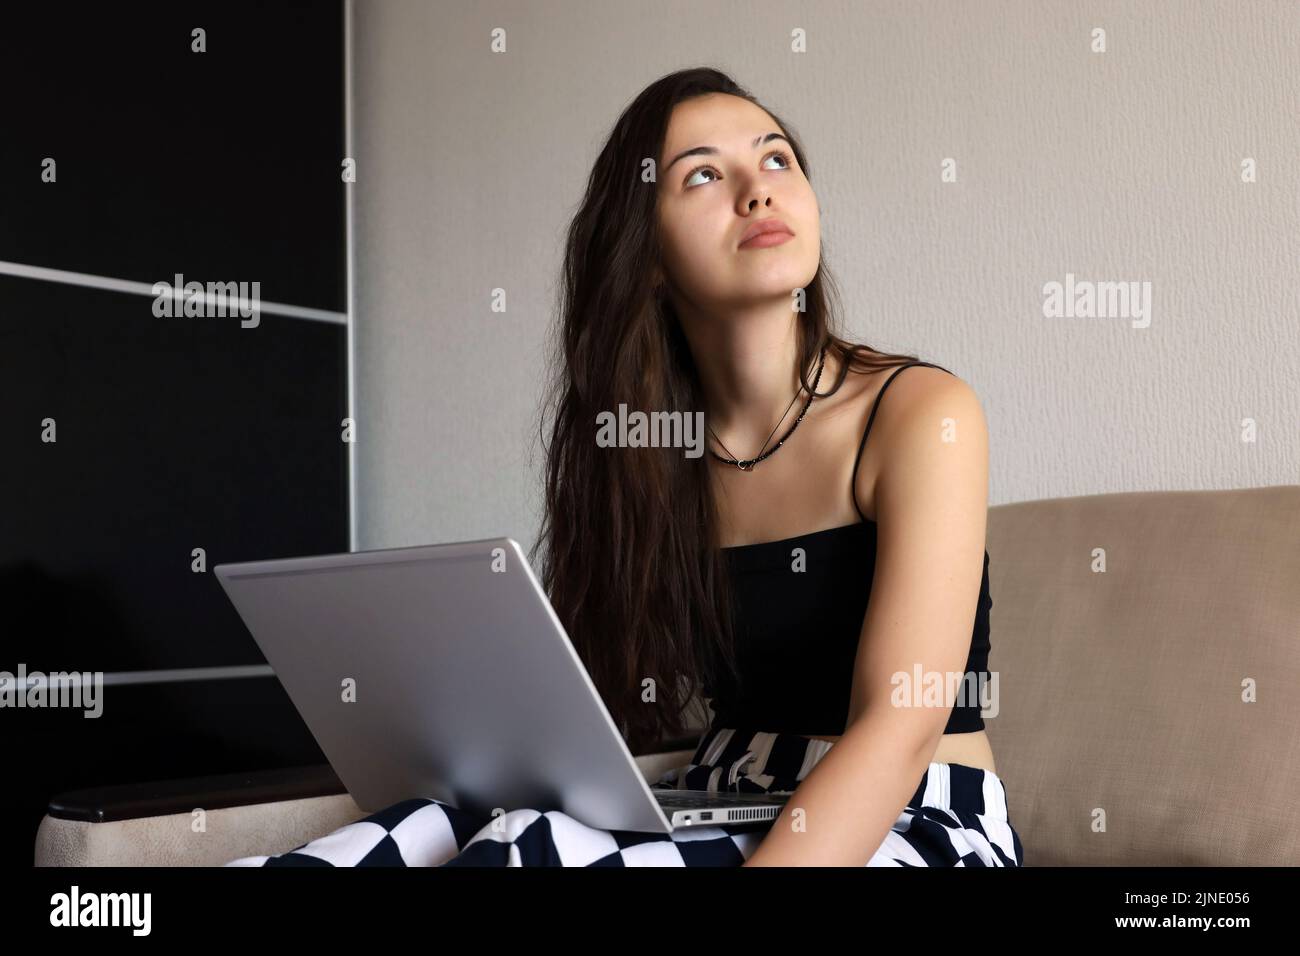 Pretty young girl with long hair wearing black top sitting with laptop on sofa and looking up. Concept of inspiration during work, study or leisure Stock Photo